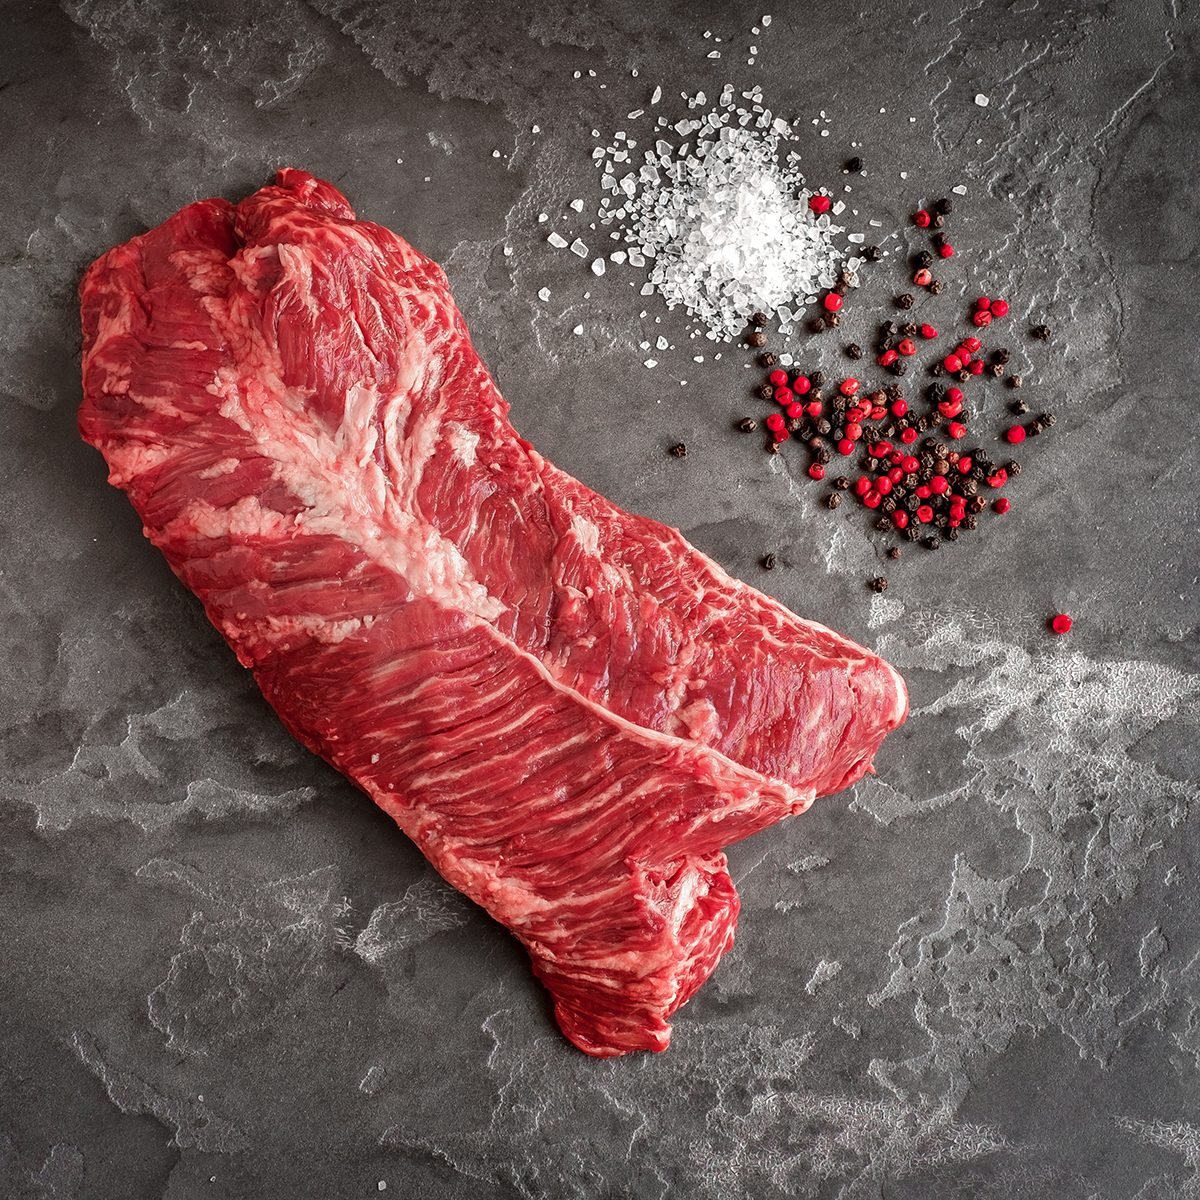 hanger Tender steak on a stone background with salt and pepper